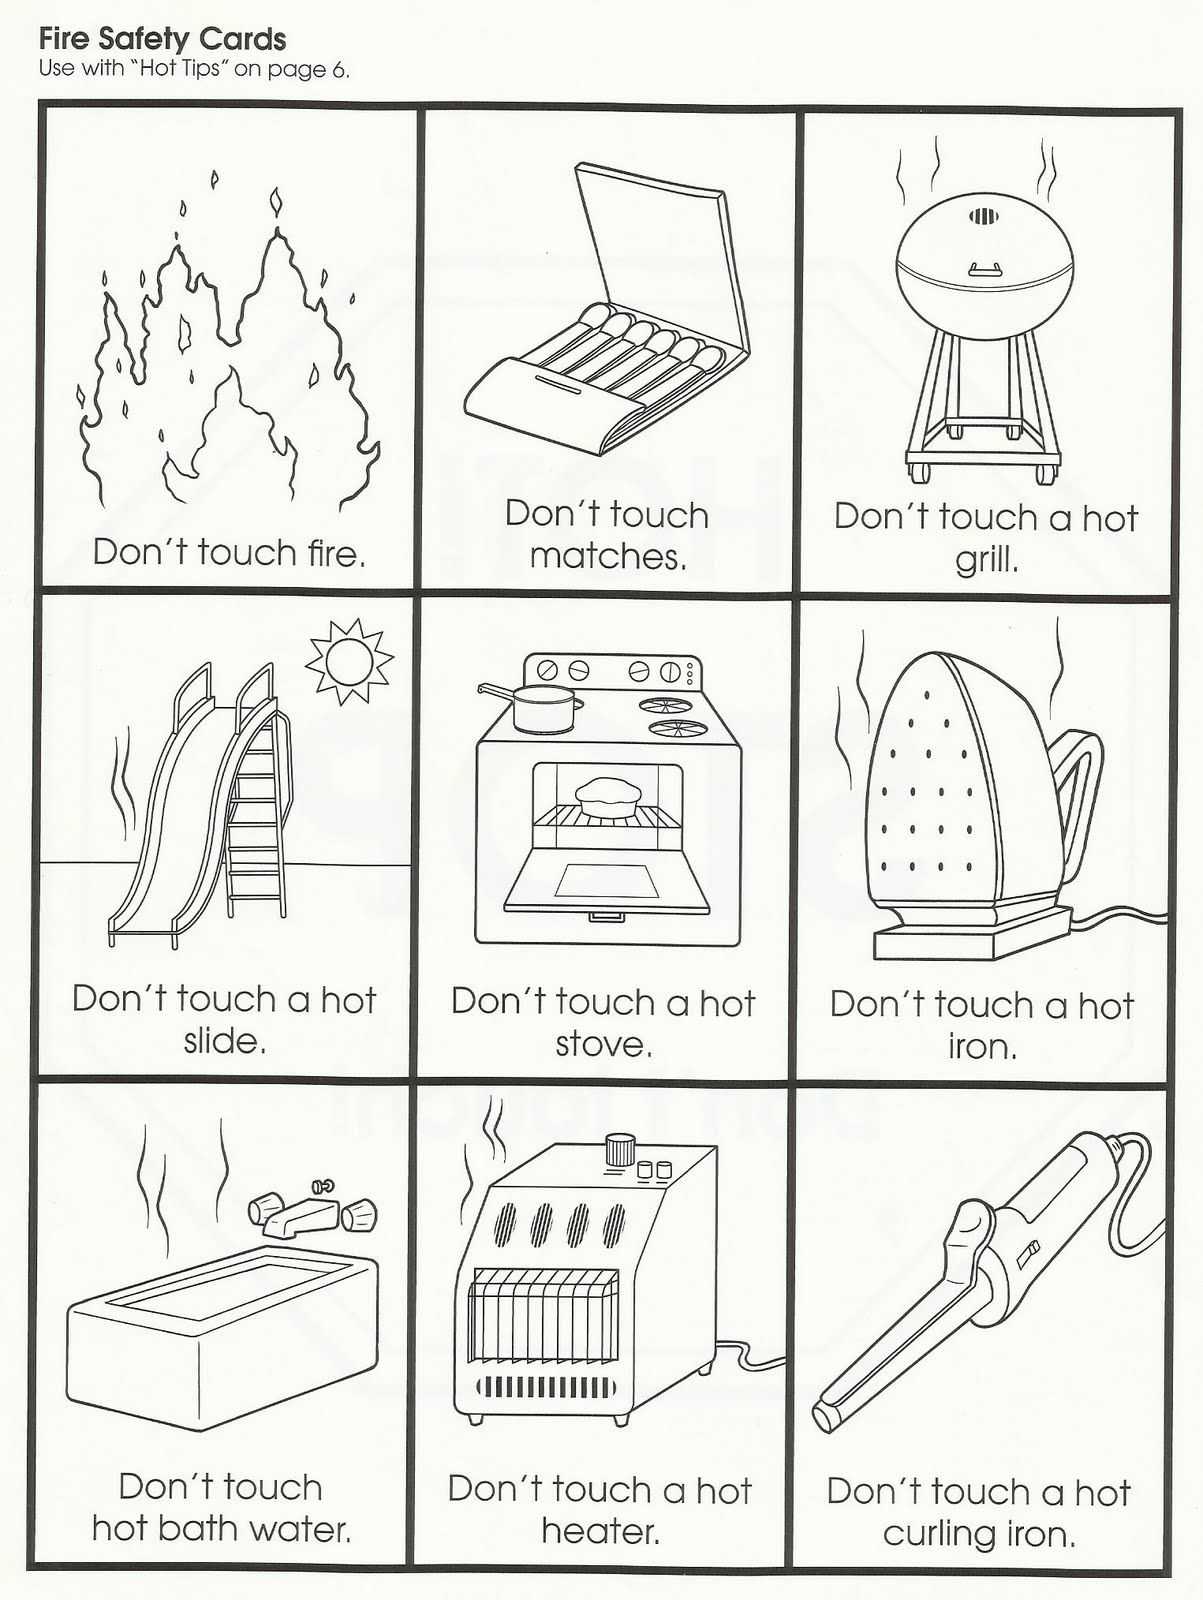 Lab Safety Worksheet Pdf as Well as Squish Preschool Ideas Fire Safety Munity Helpers Fire & Safety